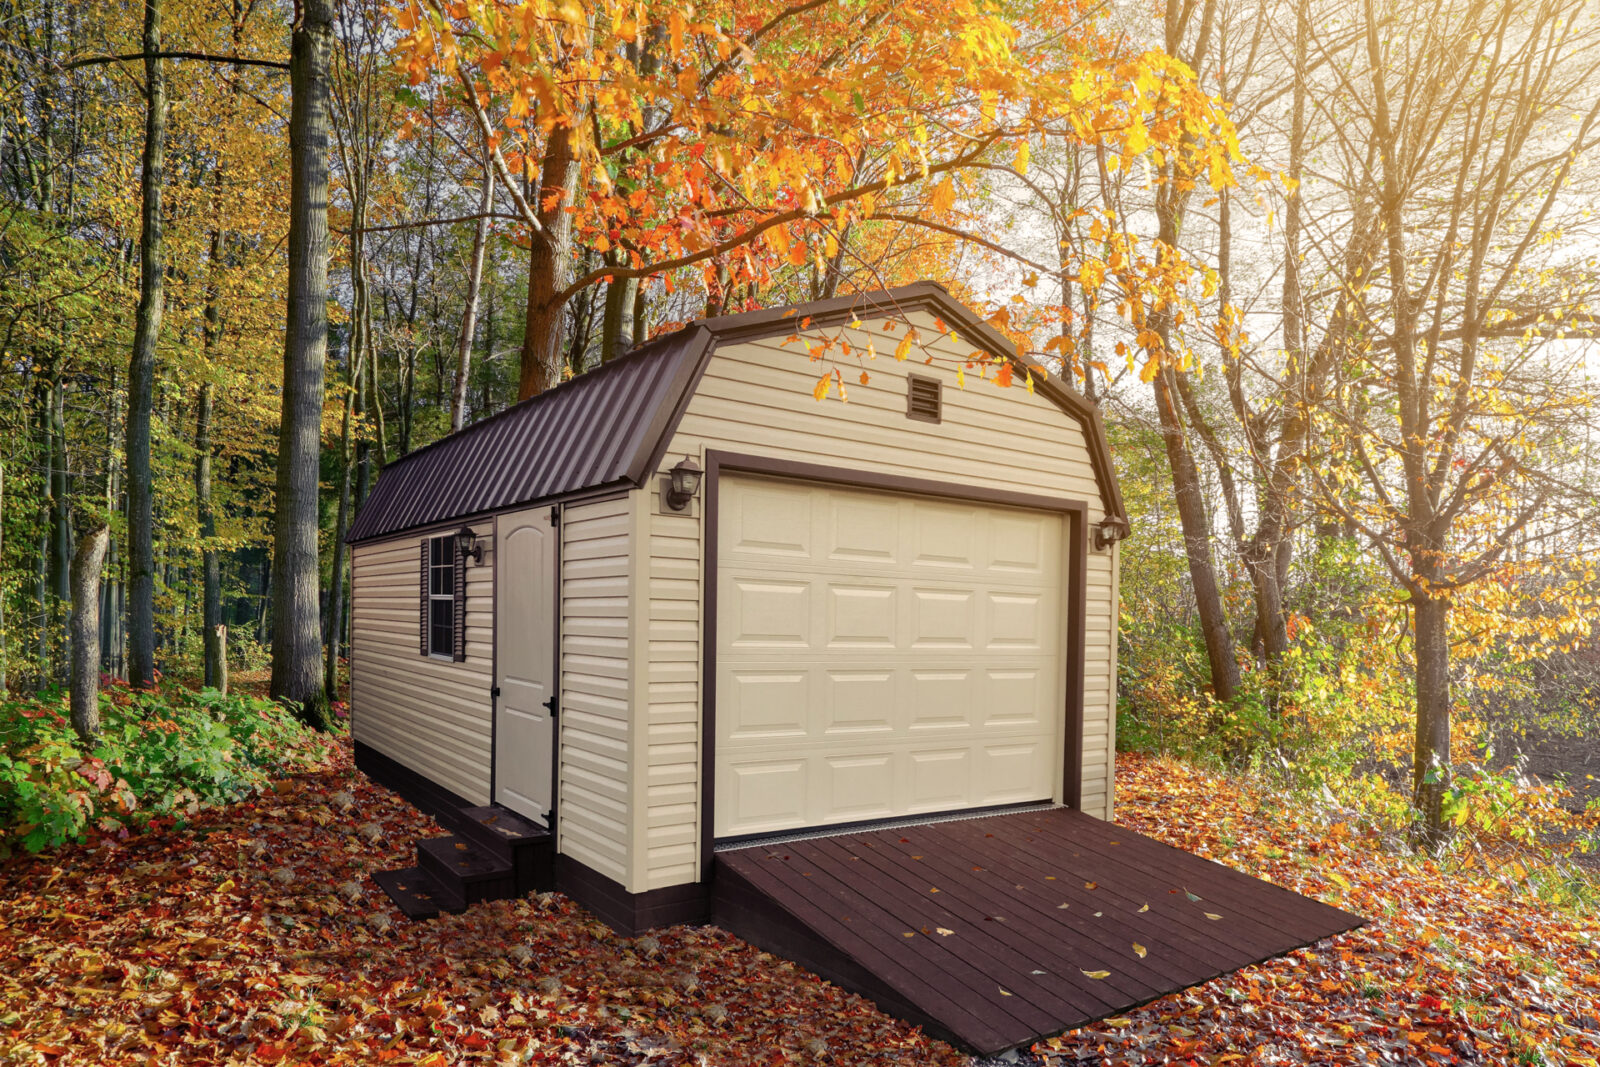 Vinyl garages for sale in KY and TN